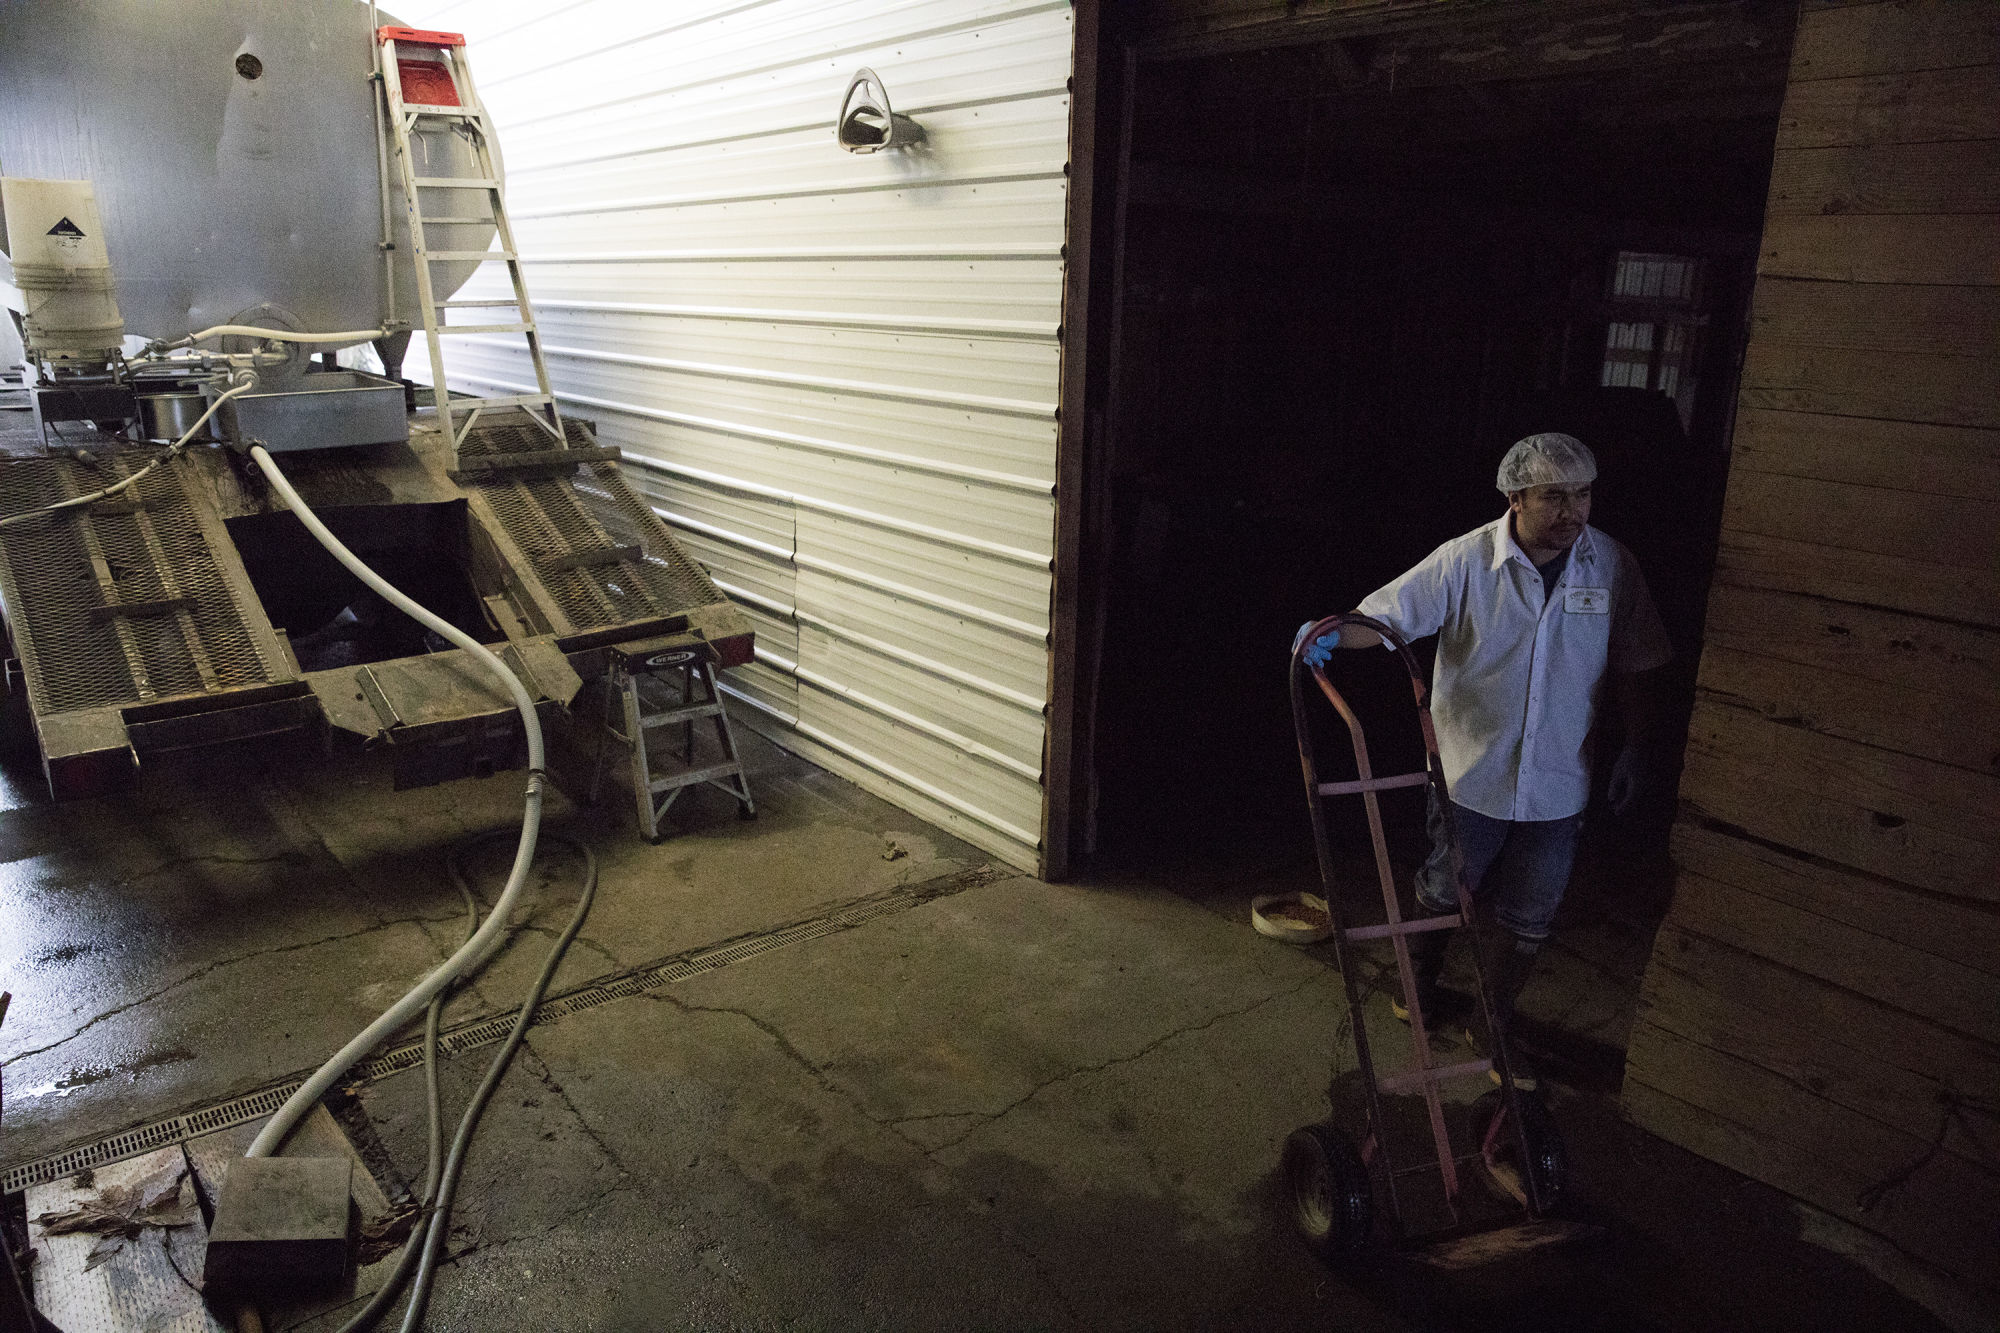 Rigoberto Herrera-Avalos, an employee of Twin Brooks Creamery near Lynden, Washington, leaves the barn where milk is being filled into a truck and other bottles are being prepared for shipment across the Pacific Northwest.  